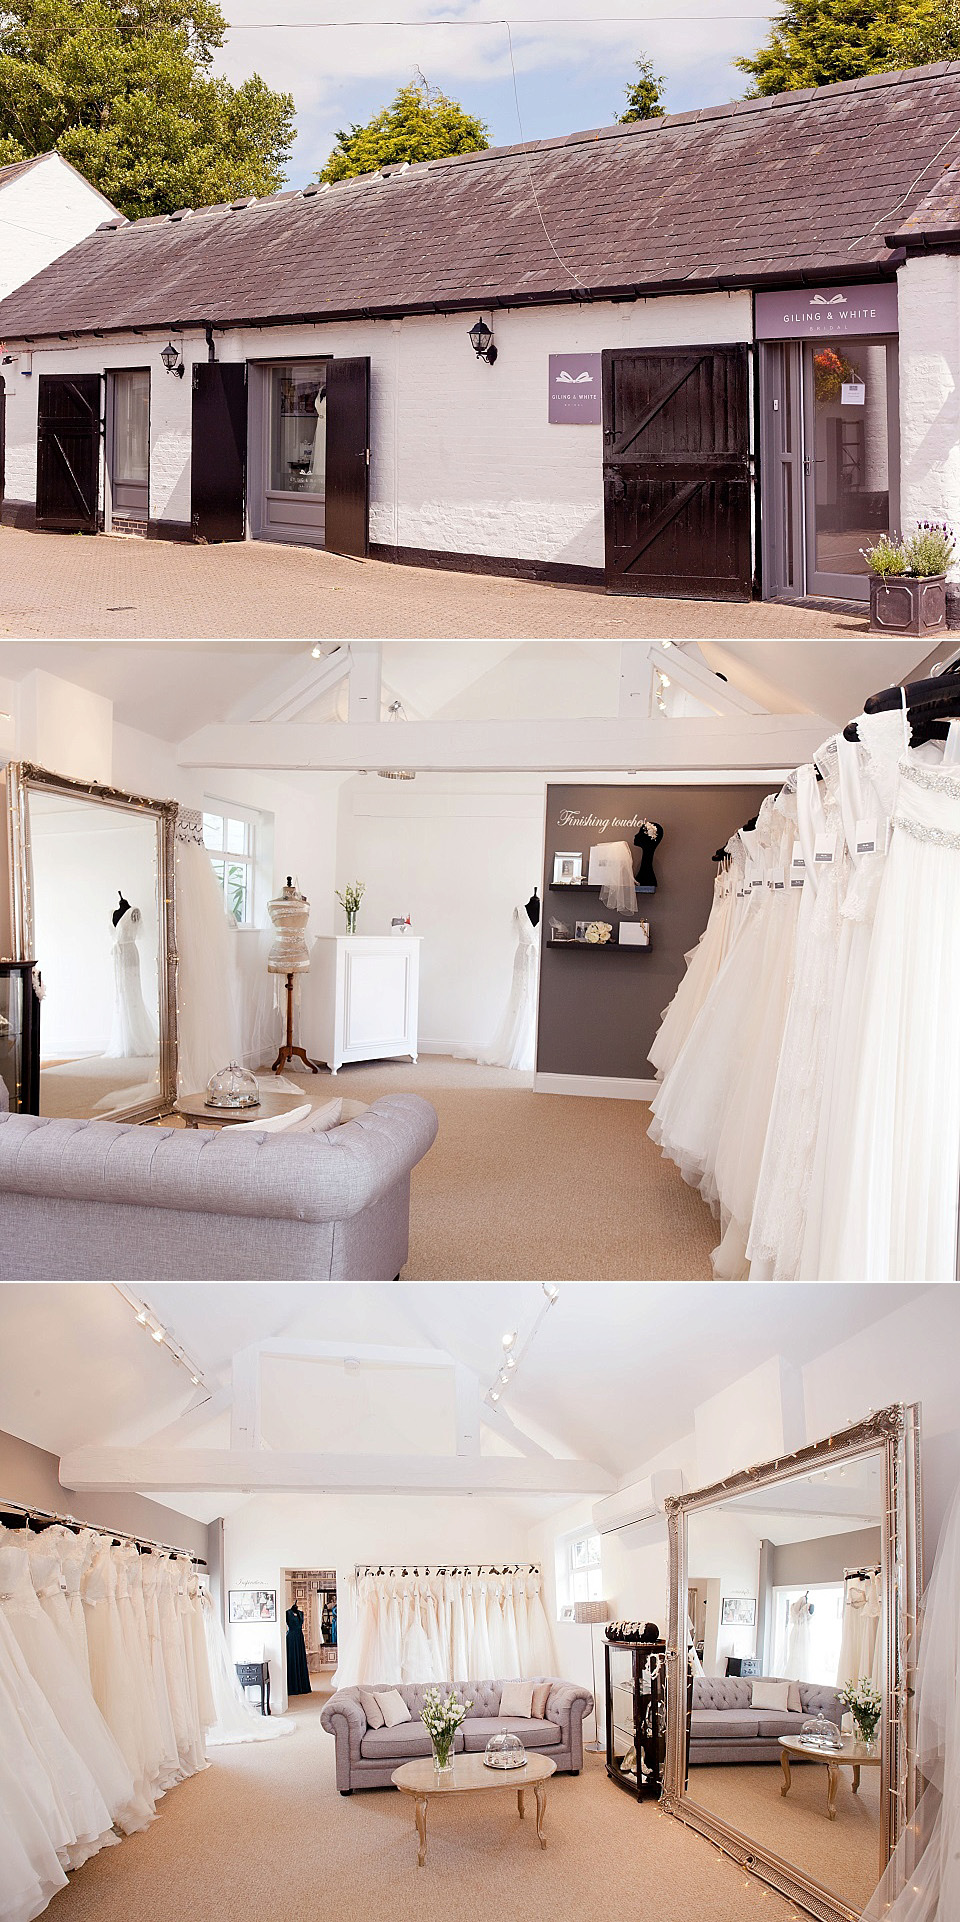 giling and white, leicester wedding dress shop